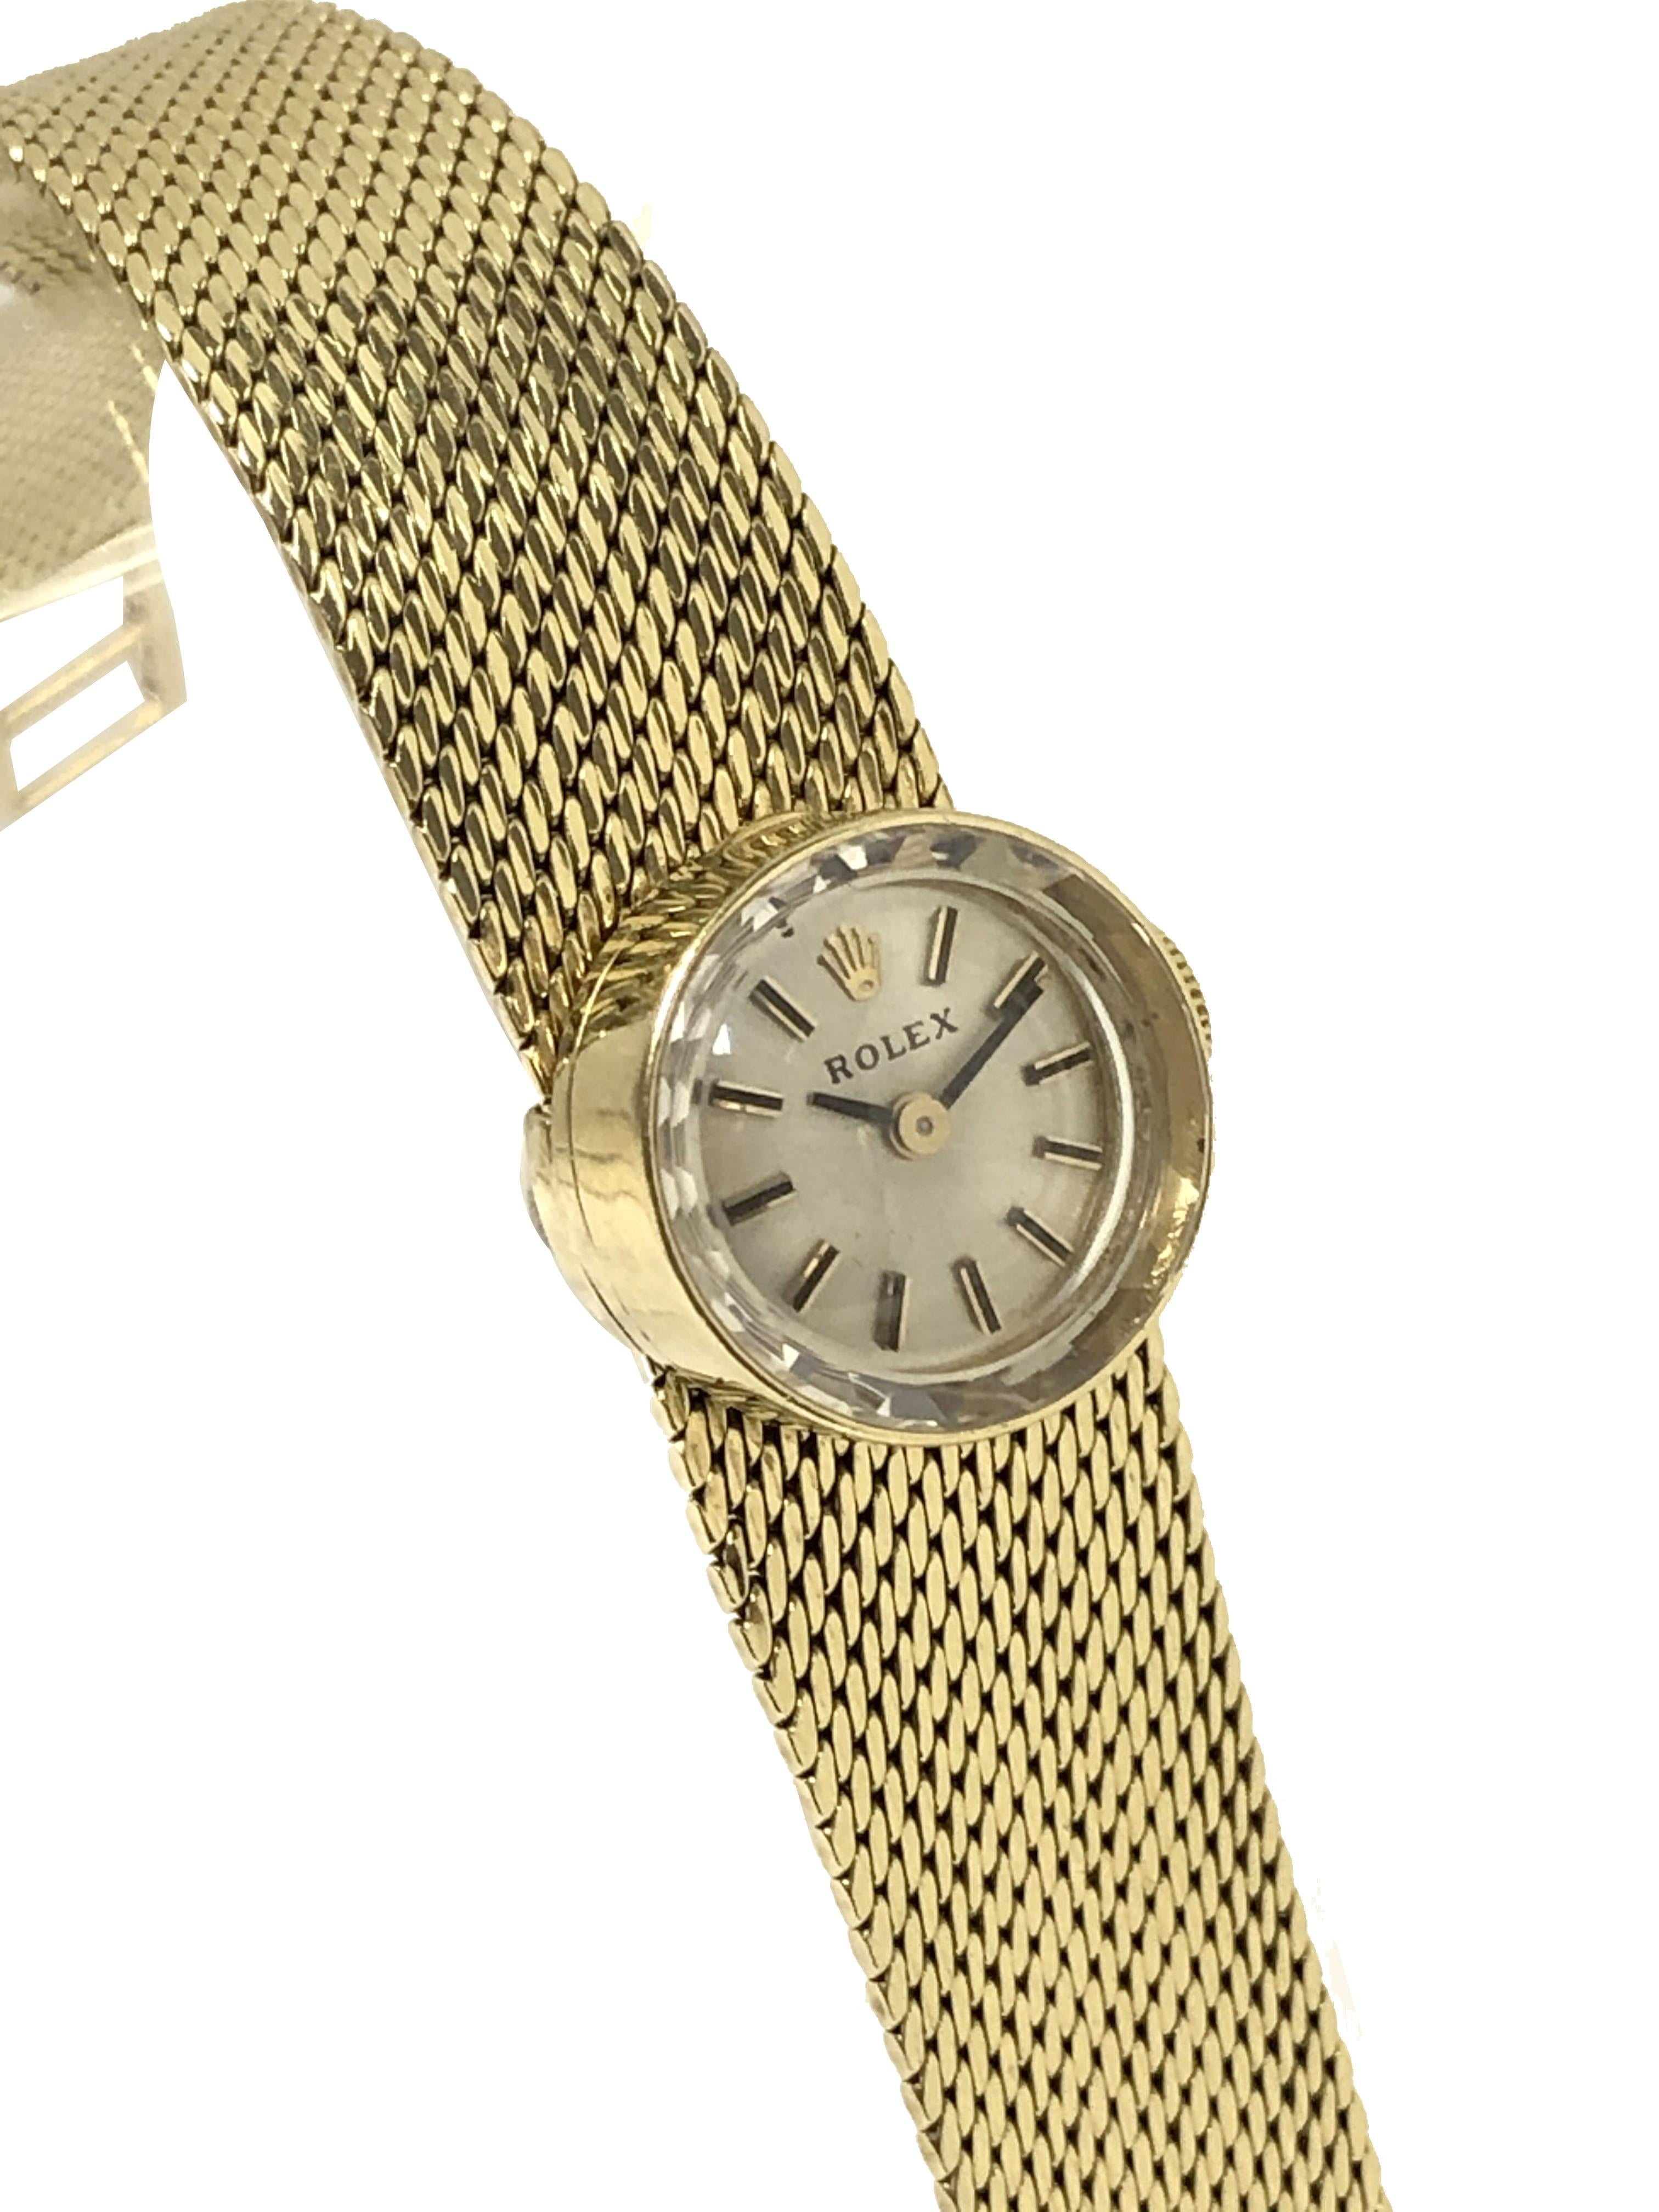 Circa 1960 Rolex Chameleon Ladies Wrist Watch, This unique Watch is on a 14k Yellow Gold soft woven style bracelet that is removable to be interchanged with 7 different color Leather and Fabric straps, each with a Yellow Gold filled Rolex buckle and